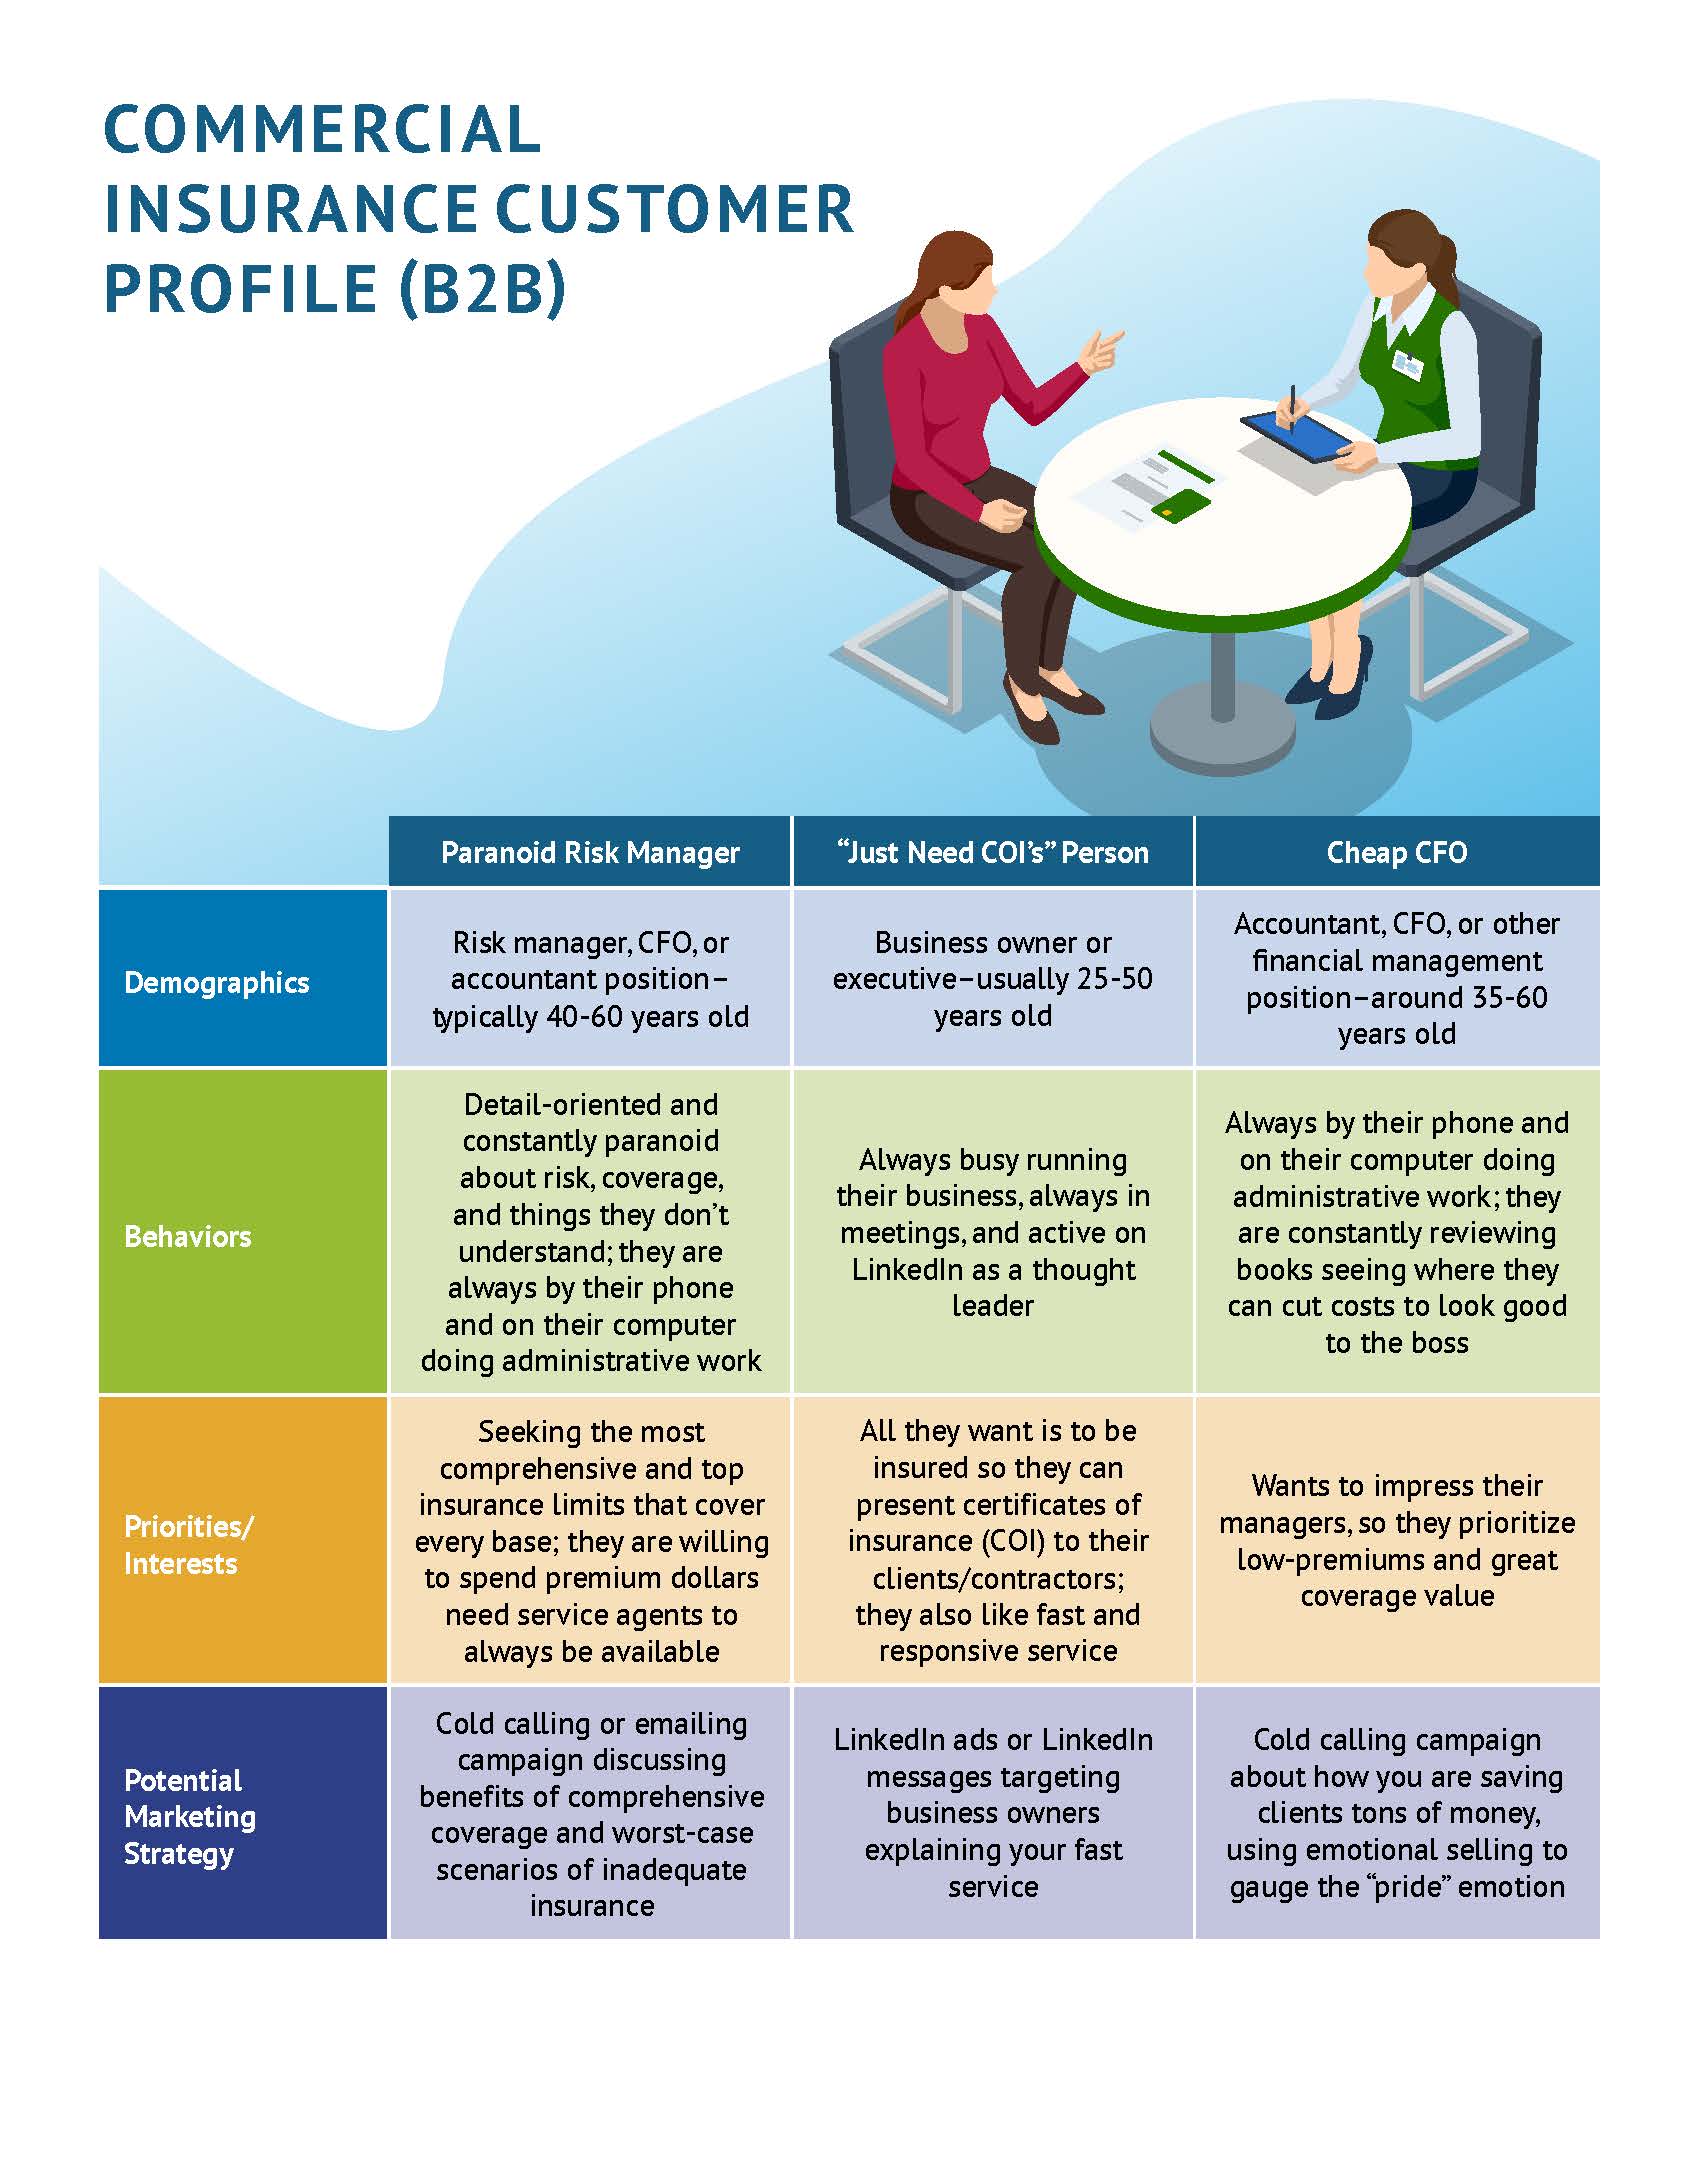 A customer profile chart for a Commercial Insurance Customer for a B2B company.